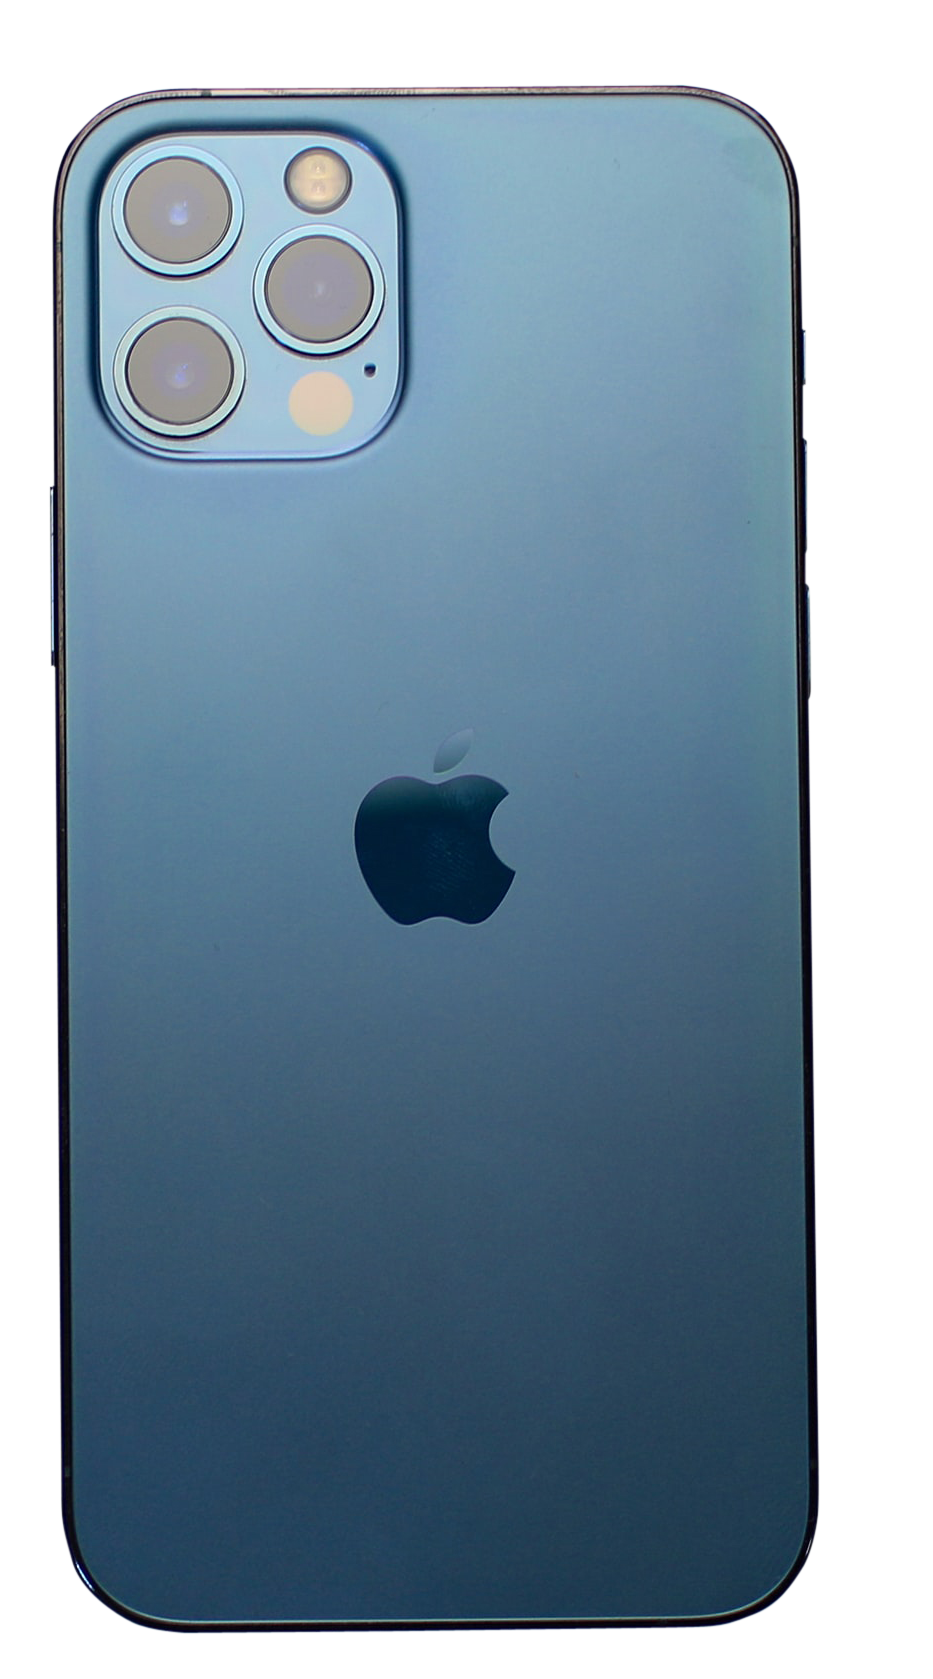 Iphone 13 pro max image, Iphone 13 pro max png, transparent Iphone 13 pro max png image, Iphone 13 pro max png hd images download